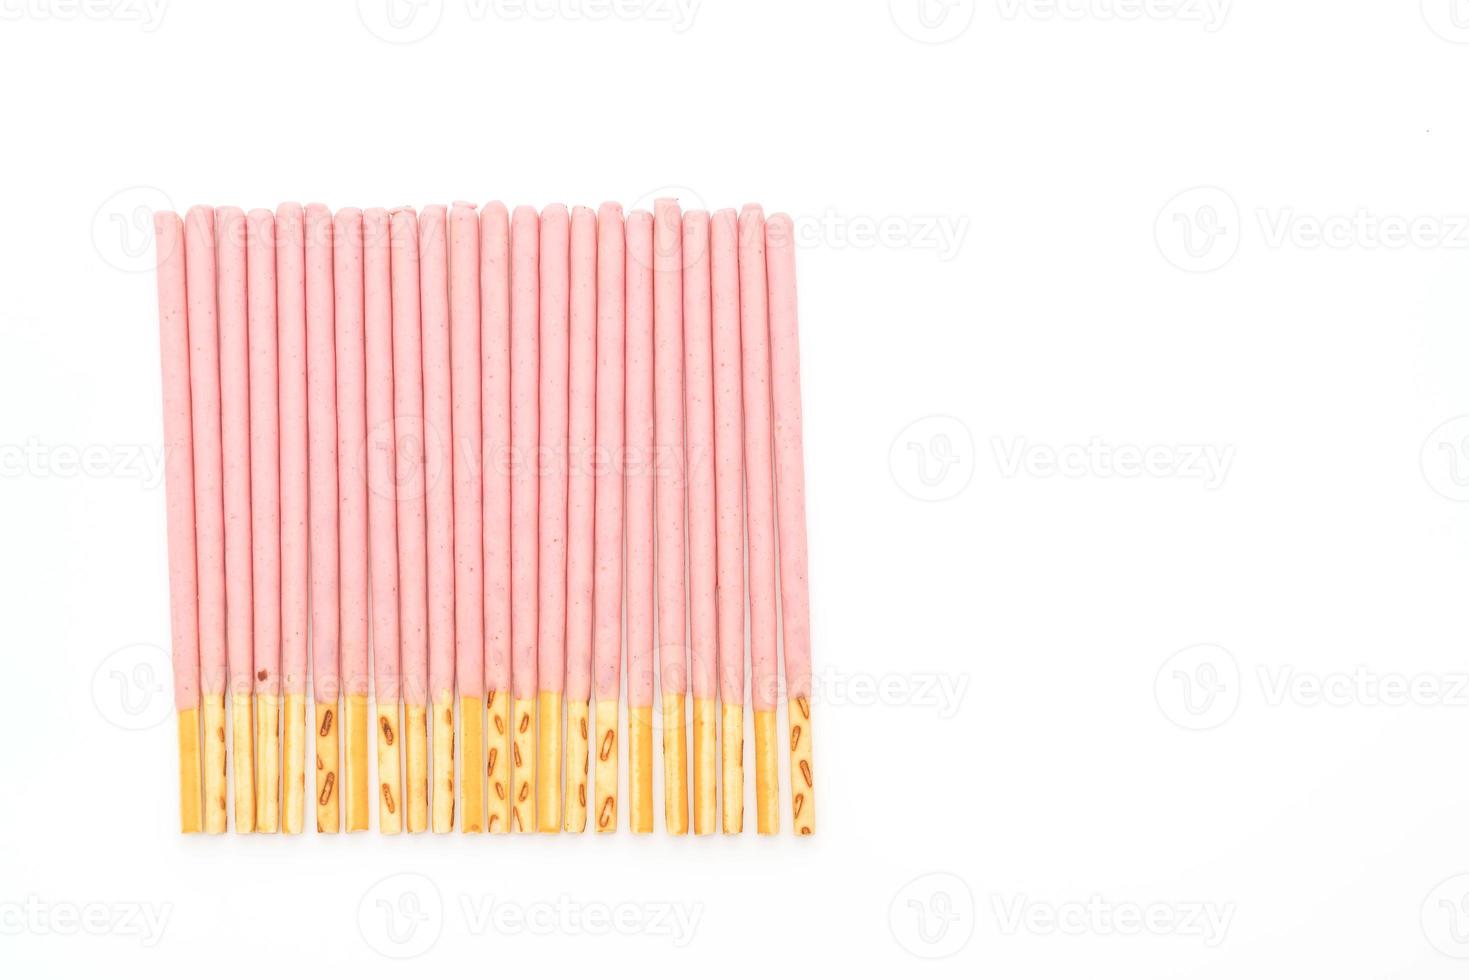 Biscuit stick with strawberry flavored on white background photo